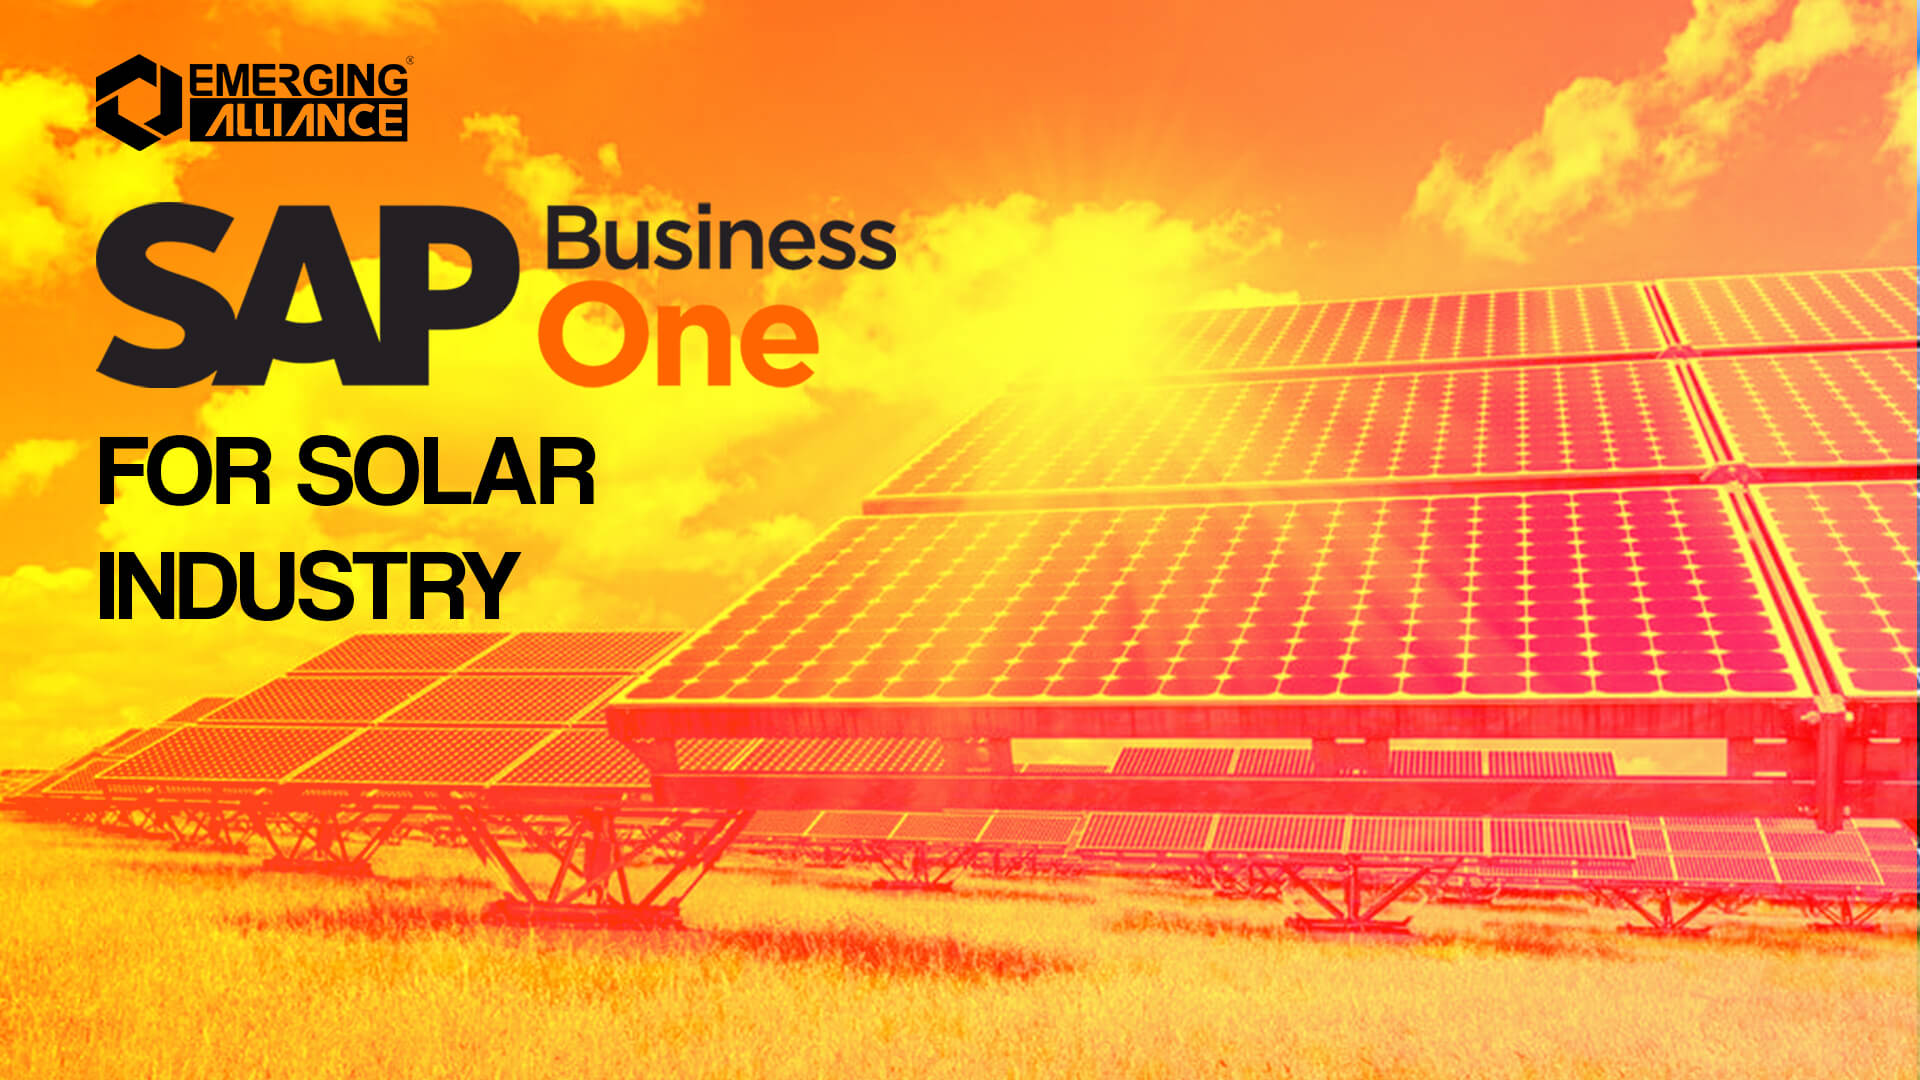 sap business one for solar industry